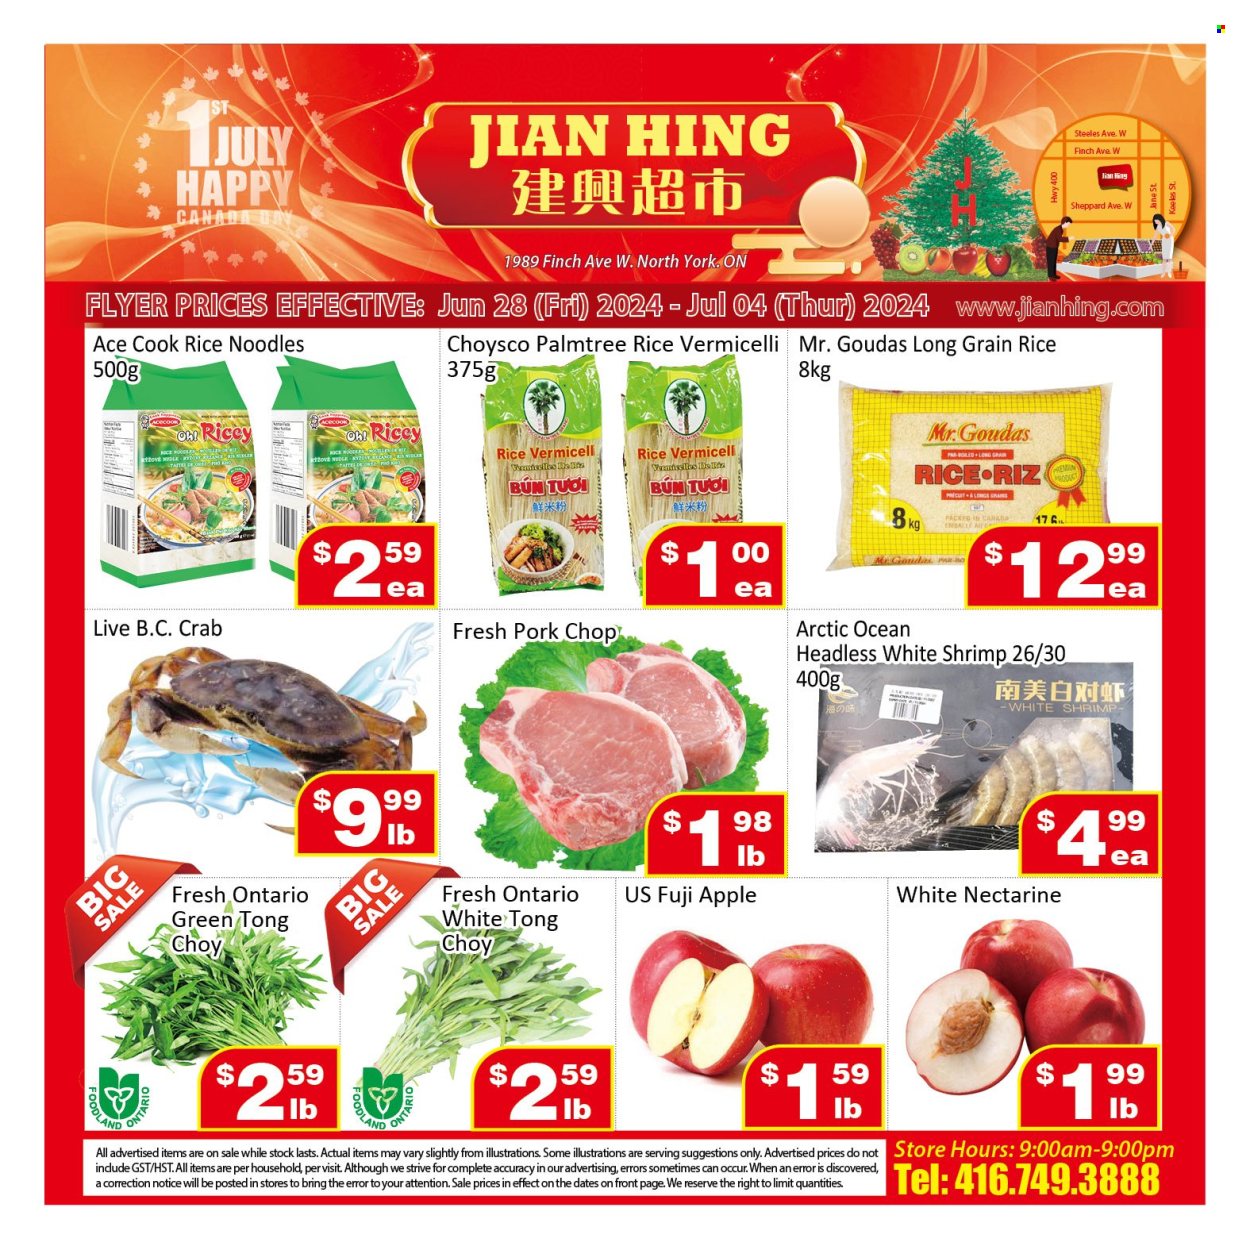 thumbnail - Jian Hing Supermarket Flyer - June 28, 2024 - July 04, 2024 - Sales products - Ace, nectarines, Fuji apple, seafood, crab, shrimps, noodles, rice vermicelli, long grain rice, antioxidant drink, pork chops, pork meat. Page 1.